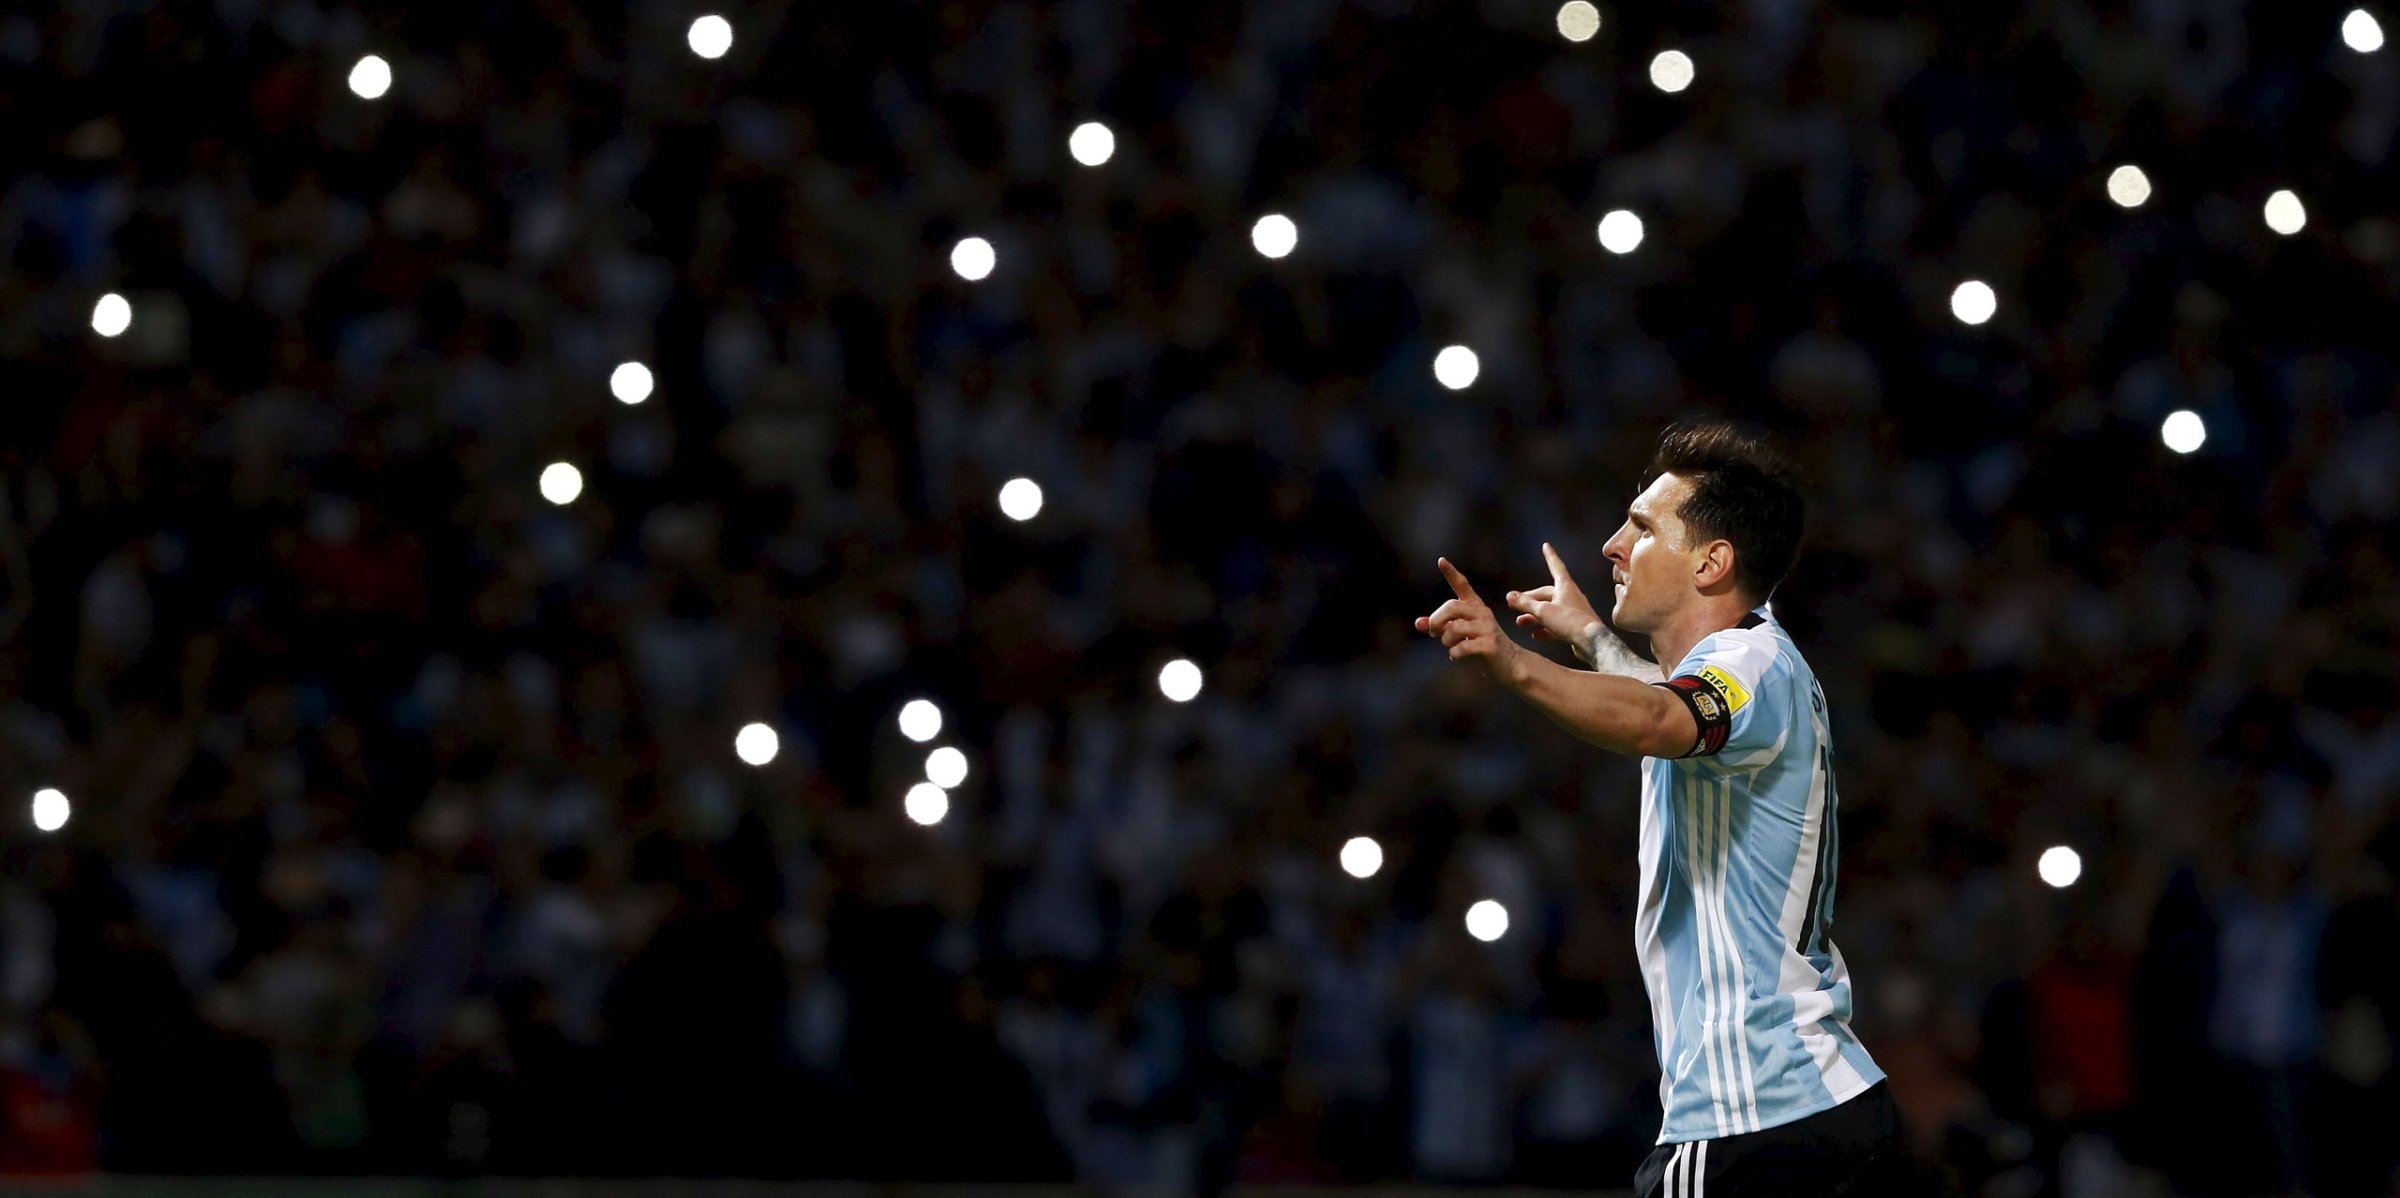 Messi celebrates after scoring a goal for Argentina in a March 29 World Cup qualifying match against Bolivia